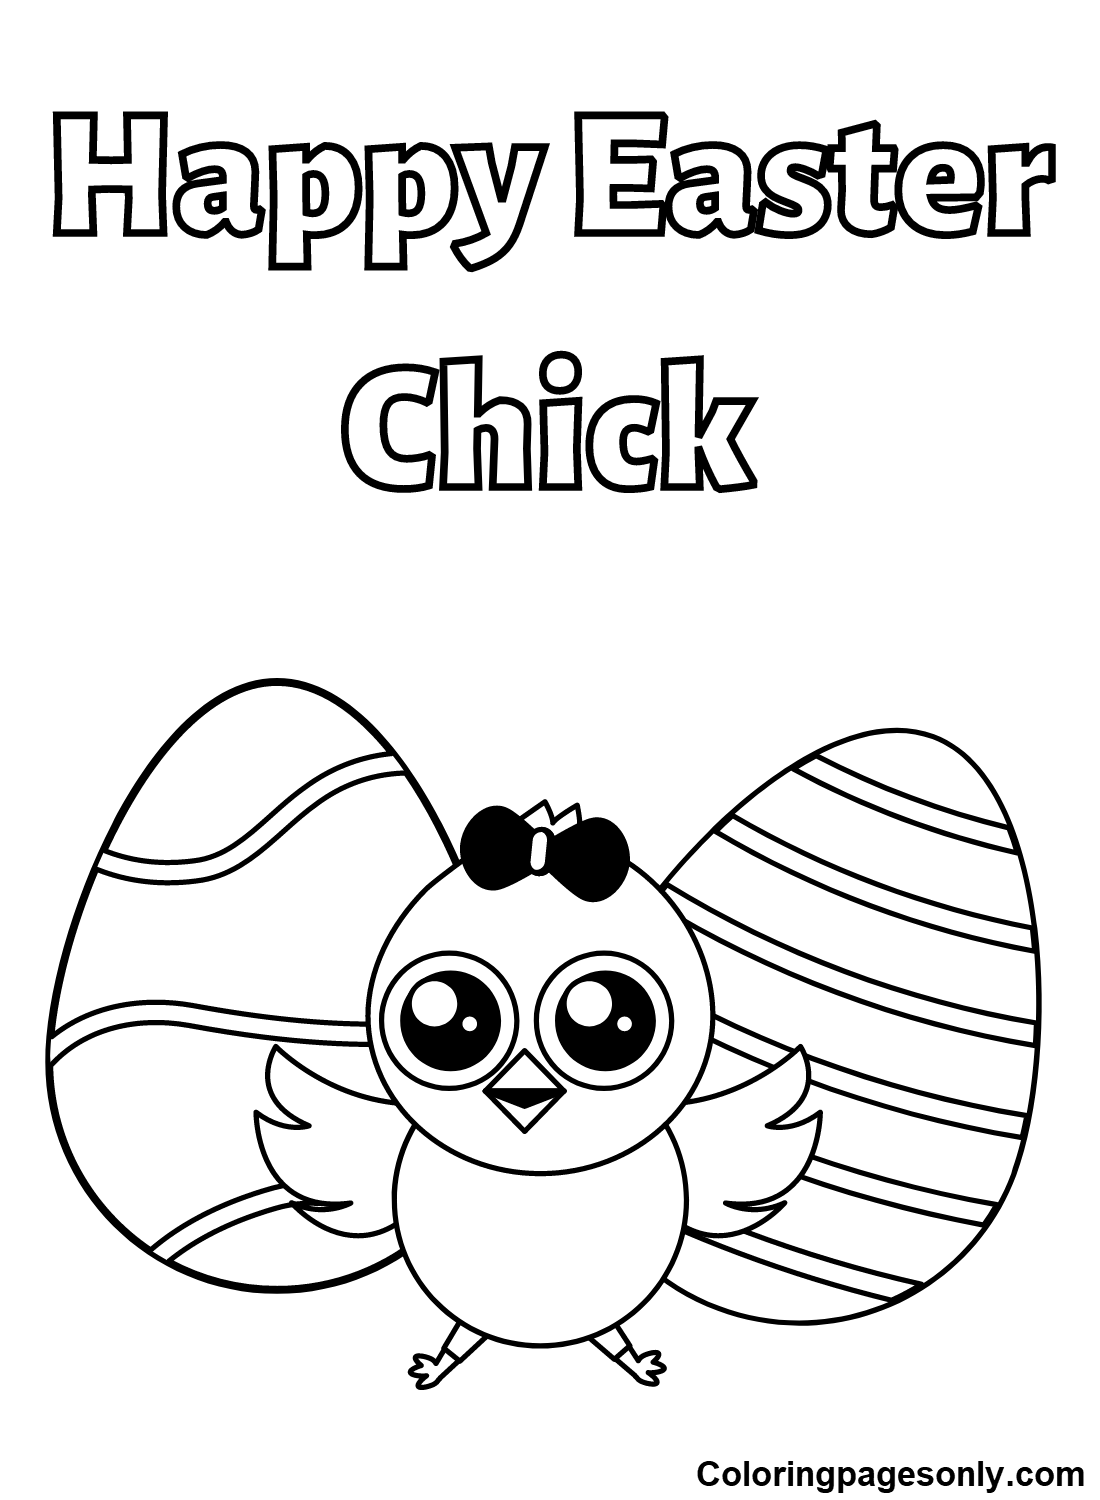 Cute Chick Easter Coloring Page